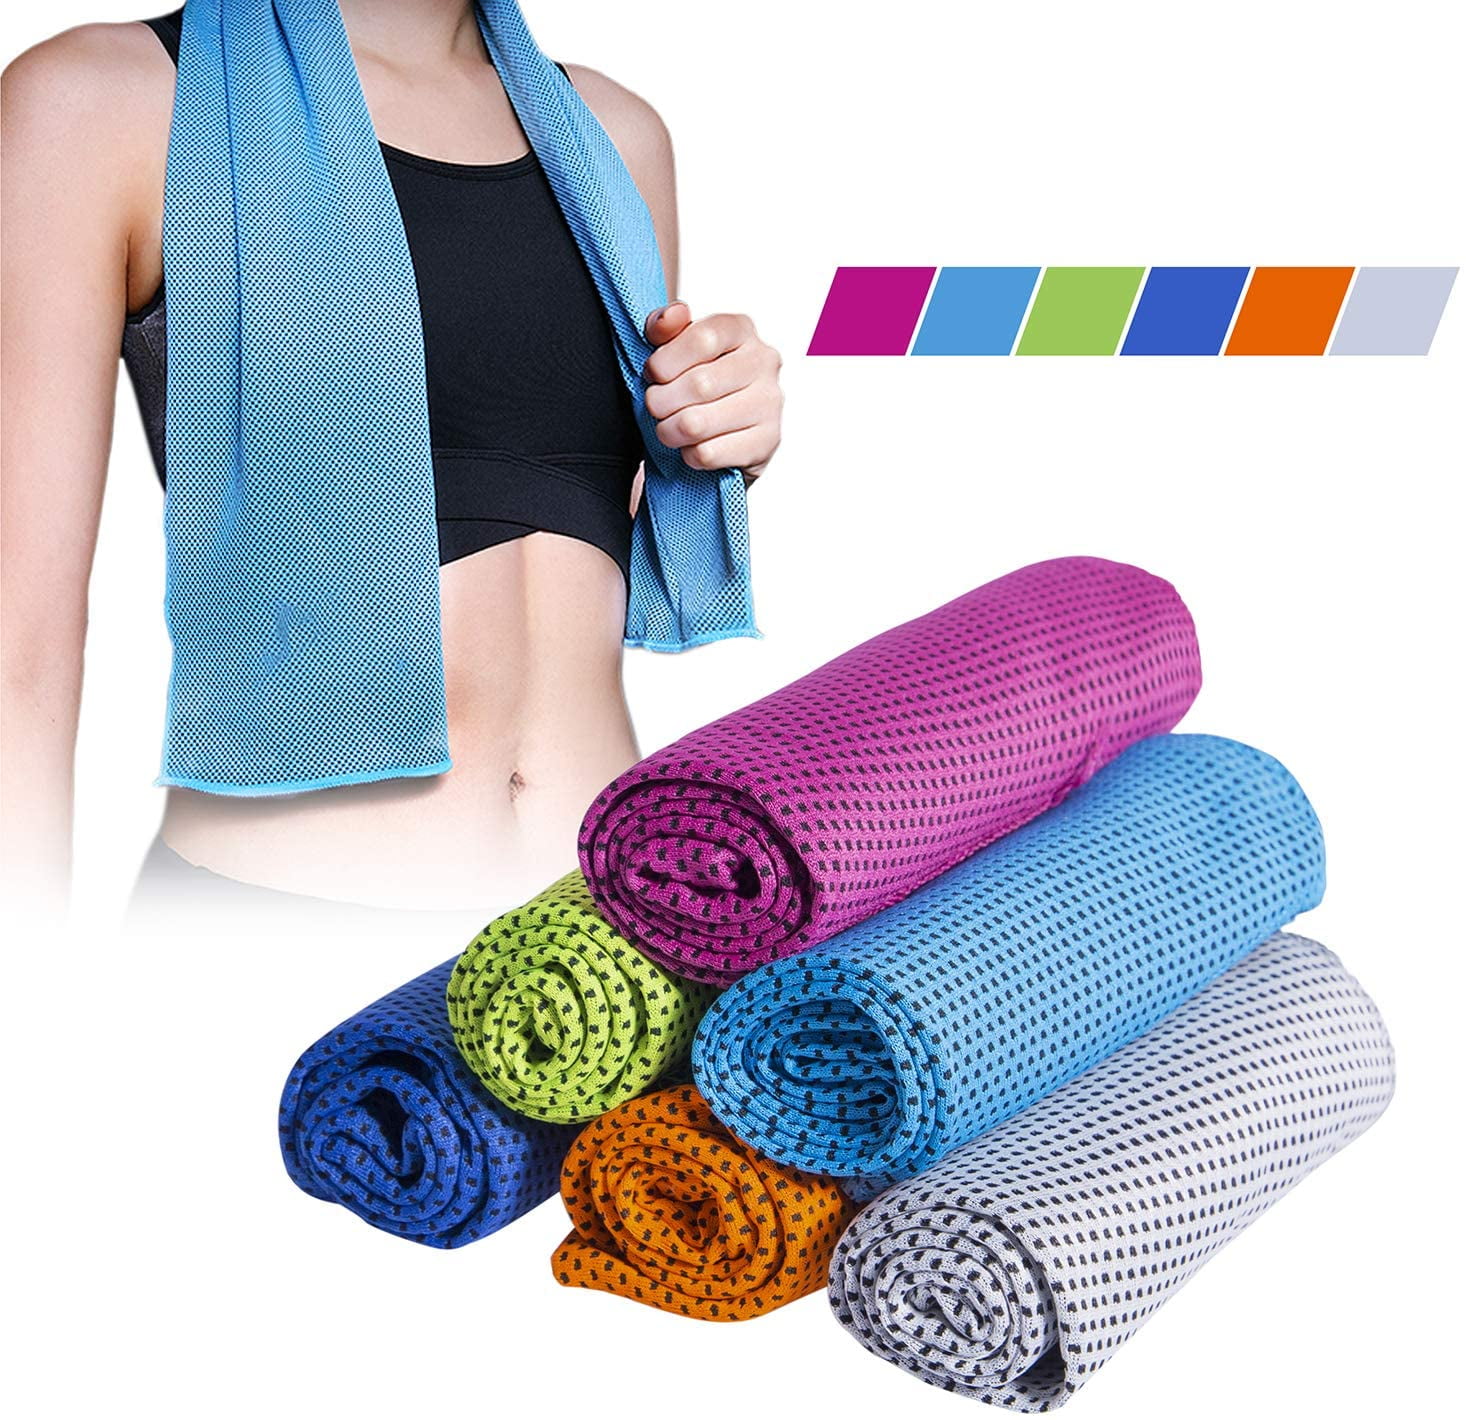 Fast Quick Drying Soft Comfortable Towel For Exercise Gym Sport Travel Fitness U 